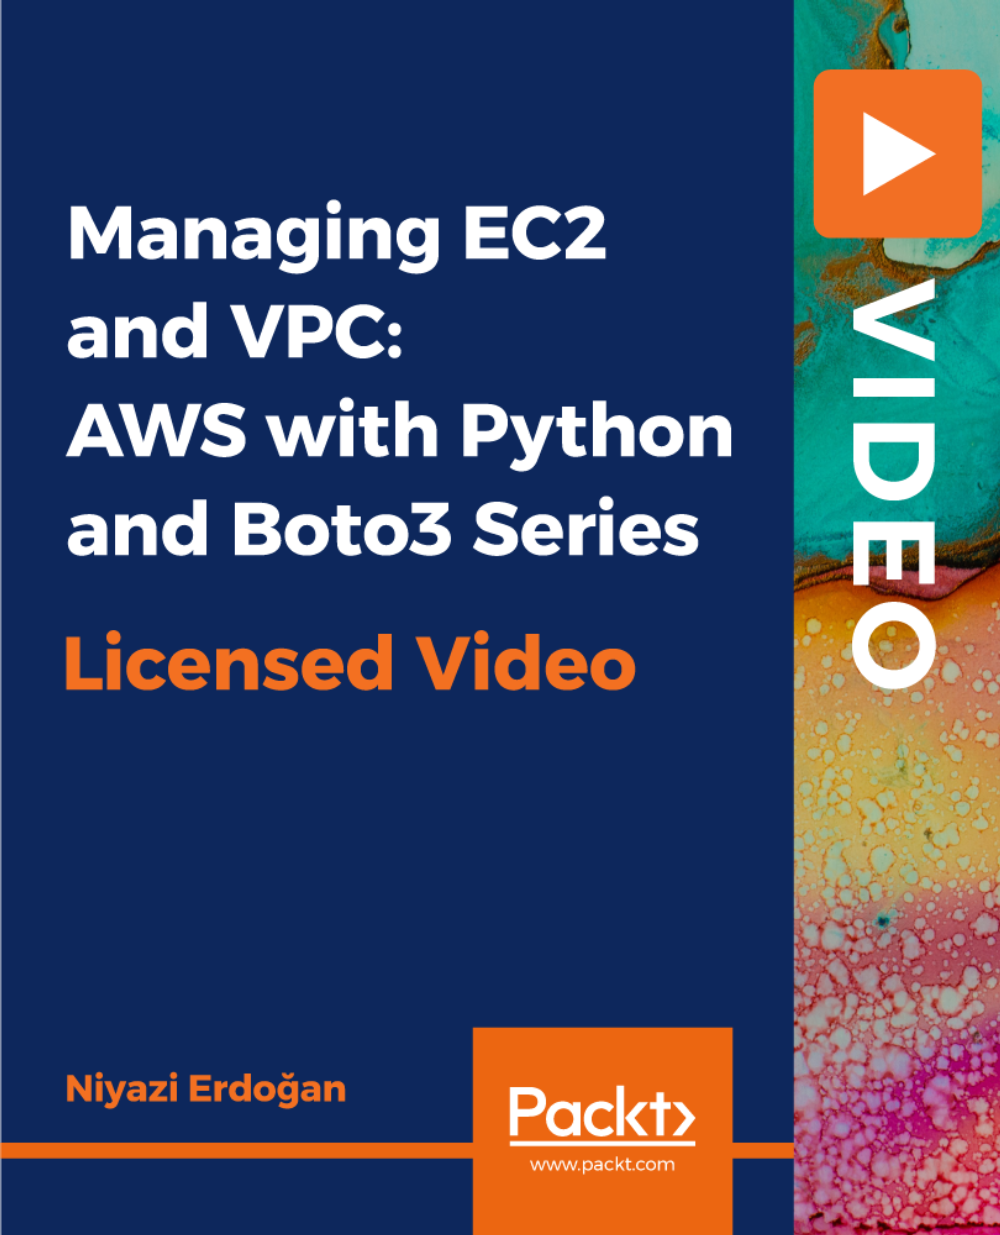 Managing EC2 and VPC: AWS with Python and Boto3 Series